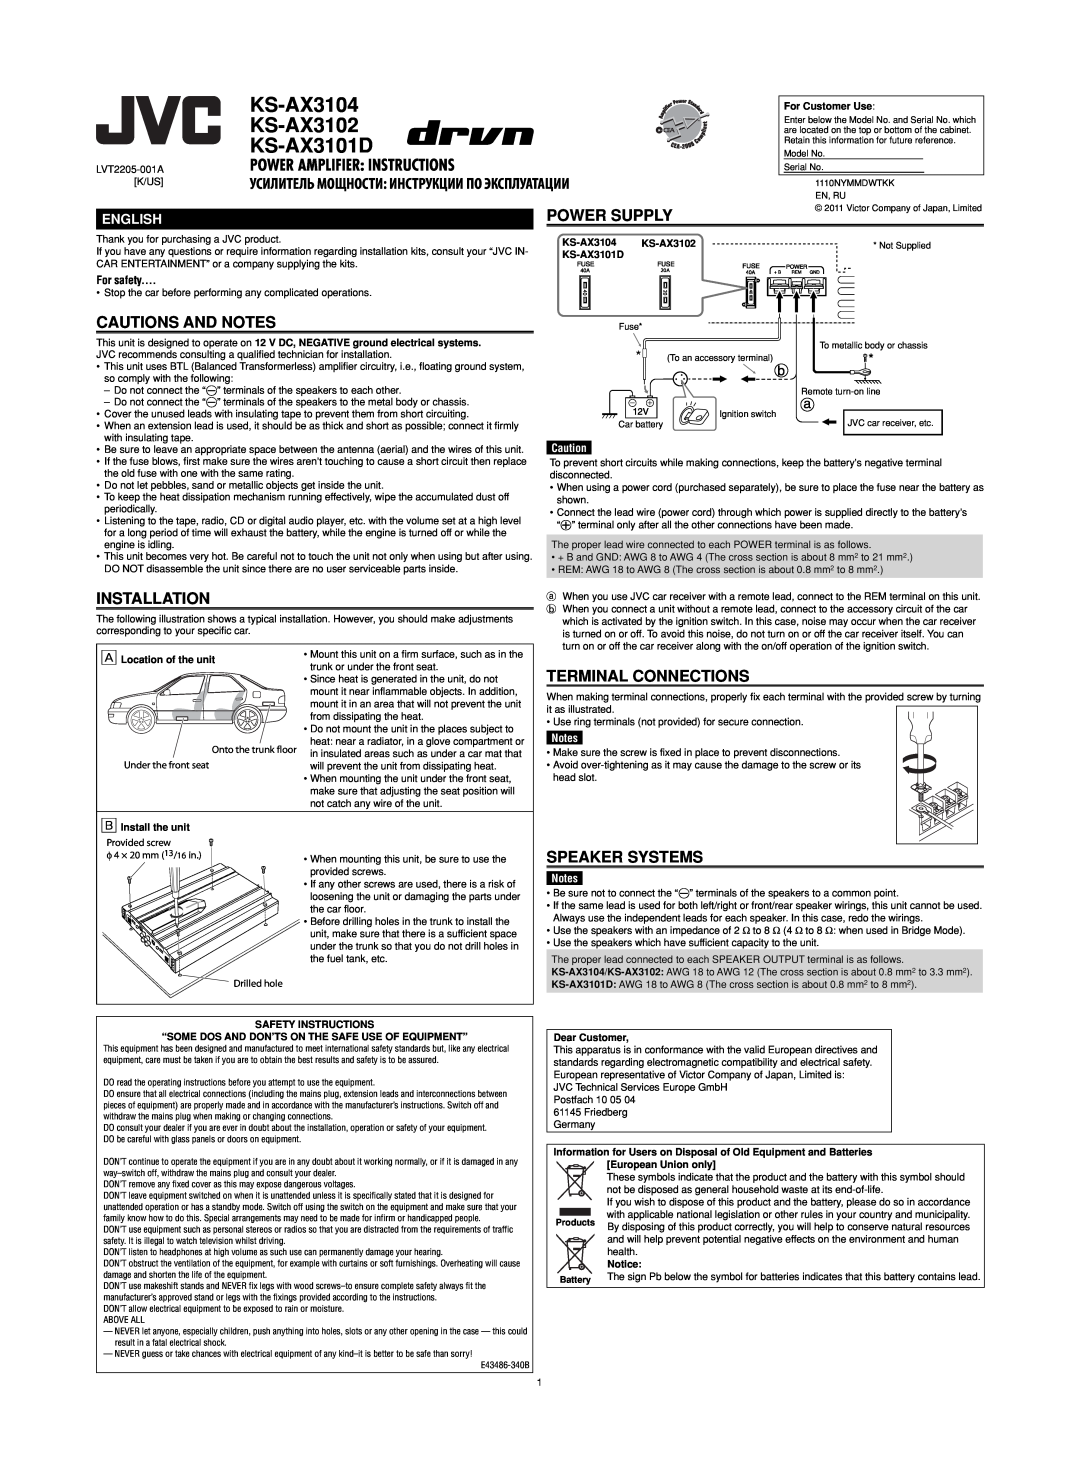 JVC KS-AX3101D user service Power Supply, Cautions And Notes, Installation, Terminal Connections, Speaker Systems, English 